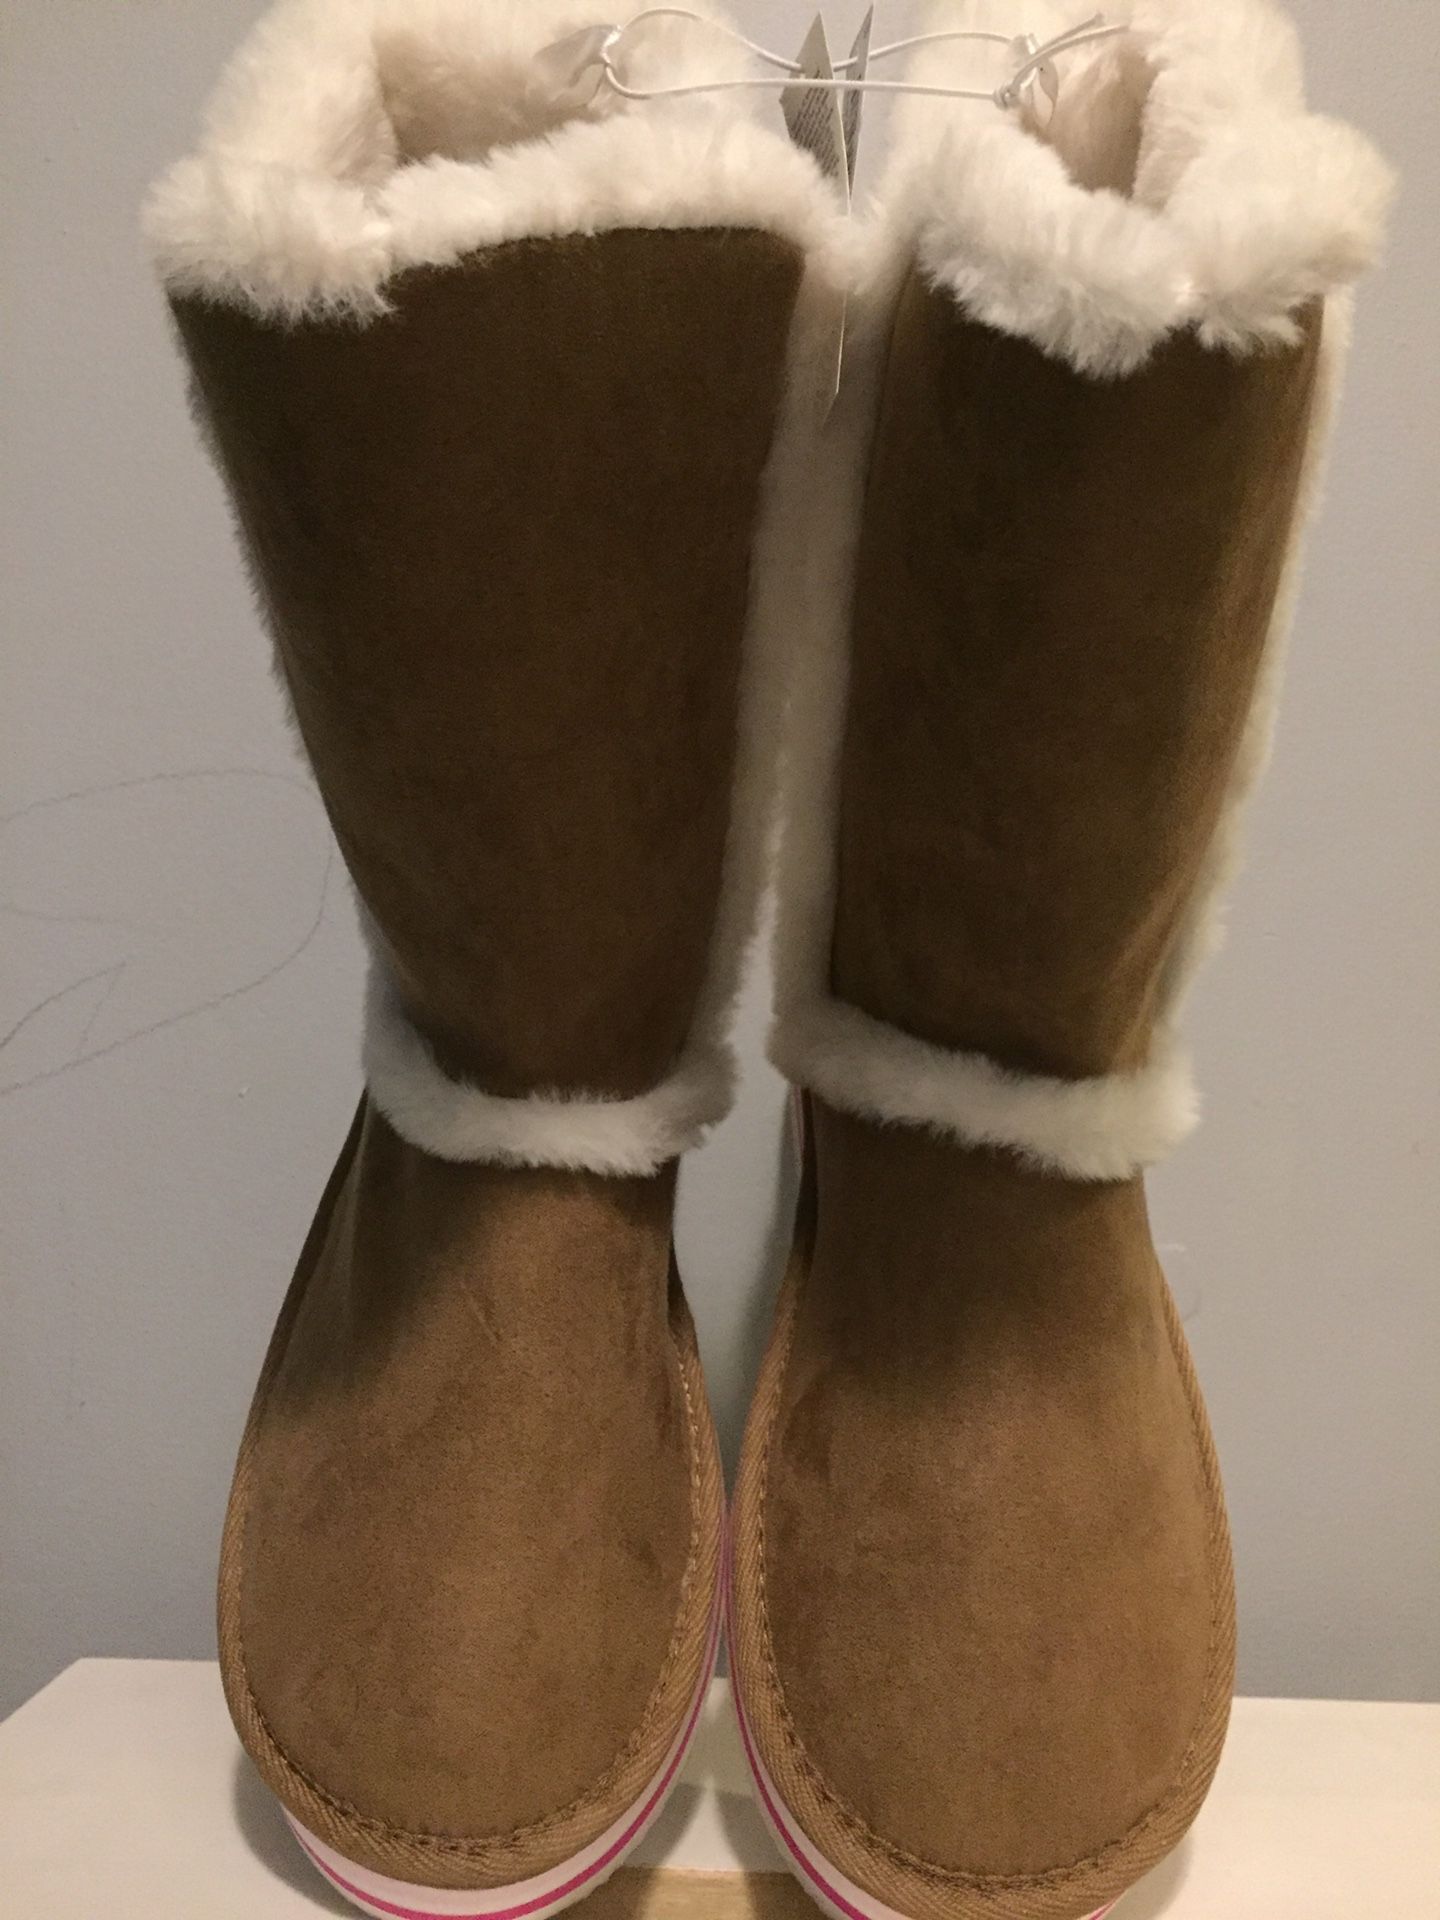 $15 Old Navy boots kids size 4 it’s brand new with tag and pick up Gahanna